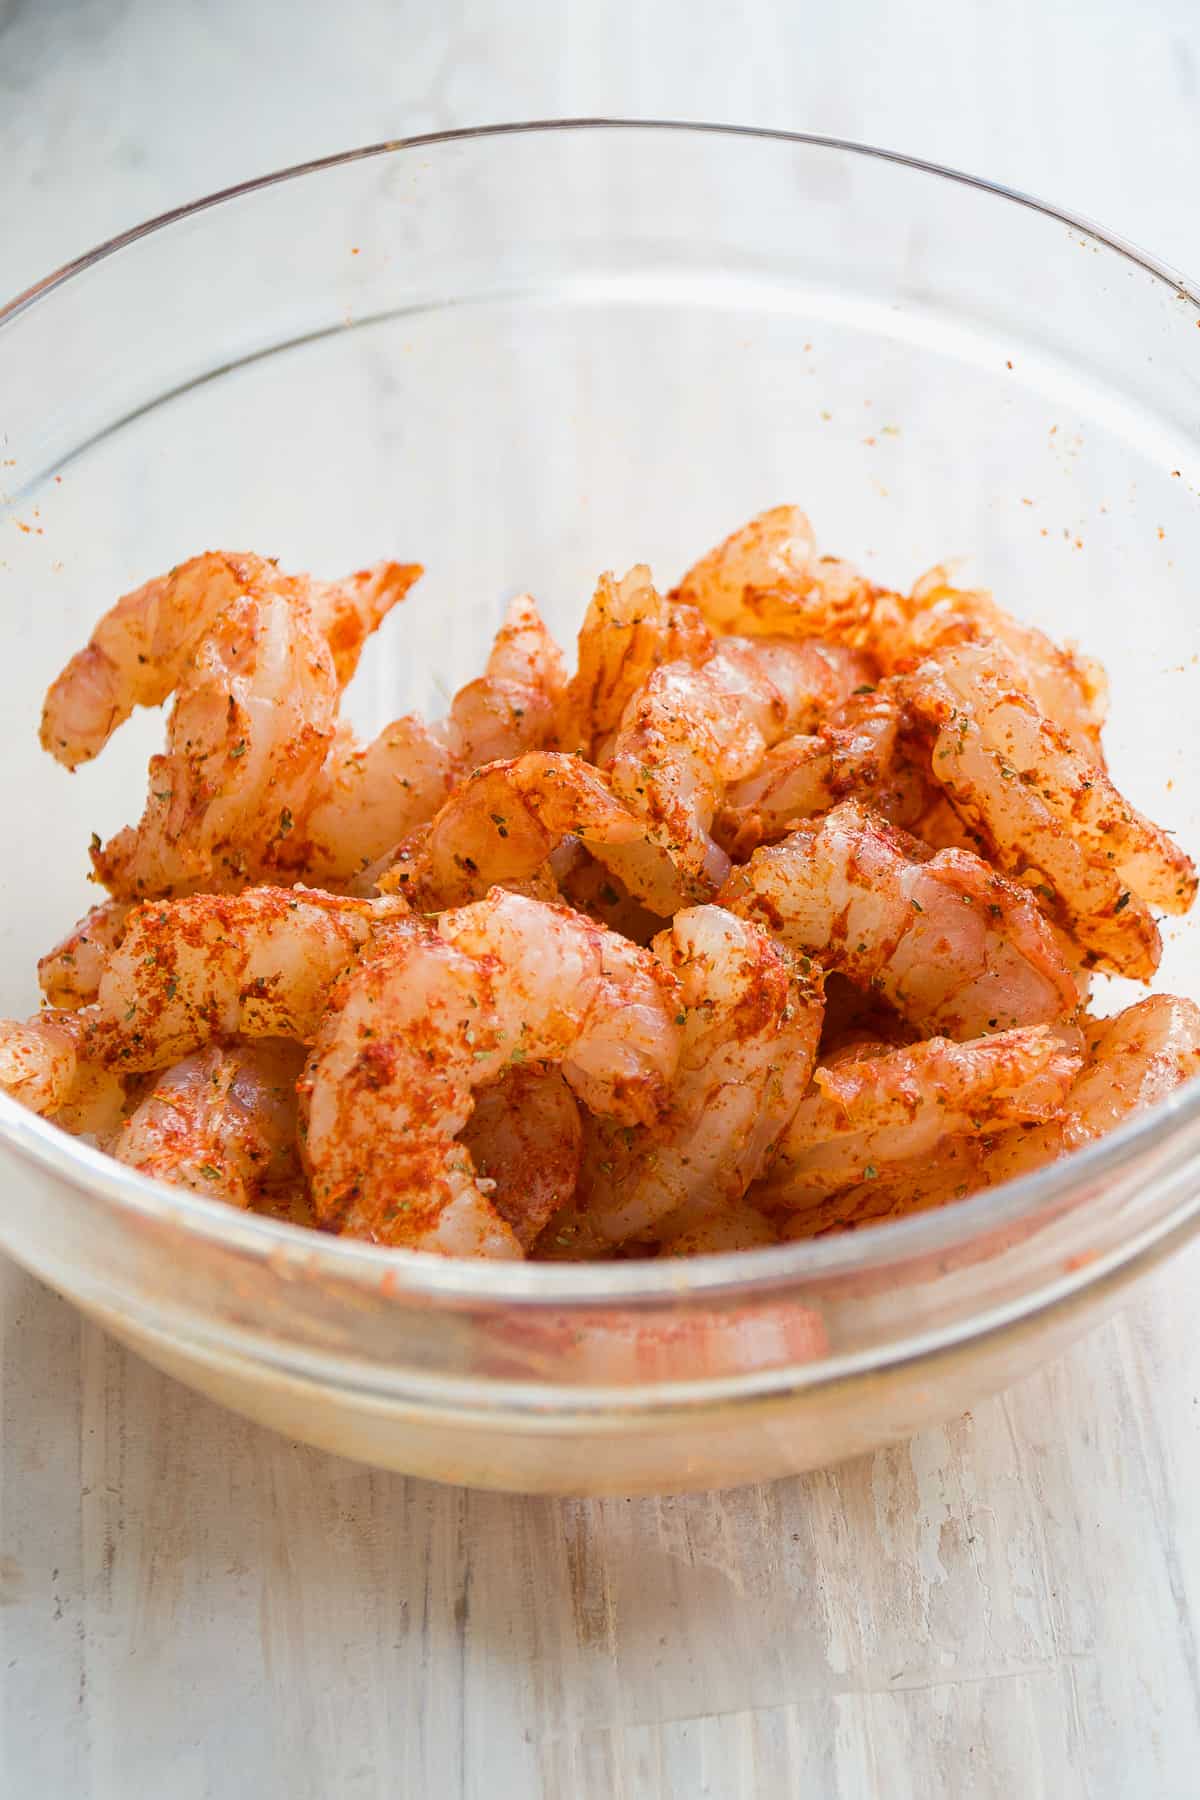 Shrimp tossed in a clear mixing bowl with seasonings.